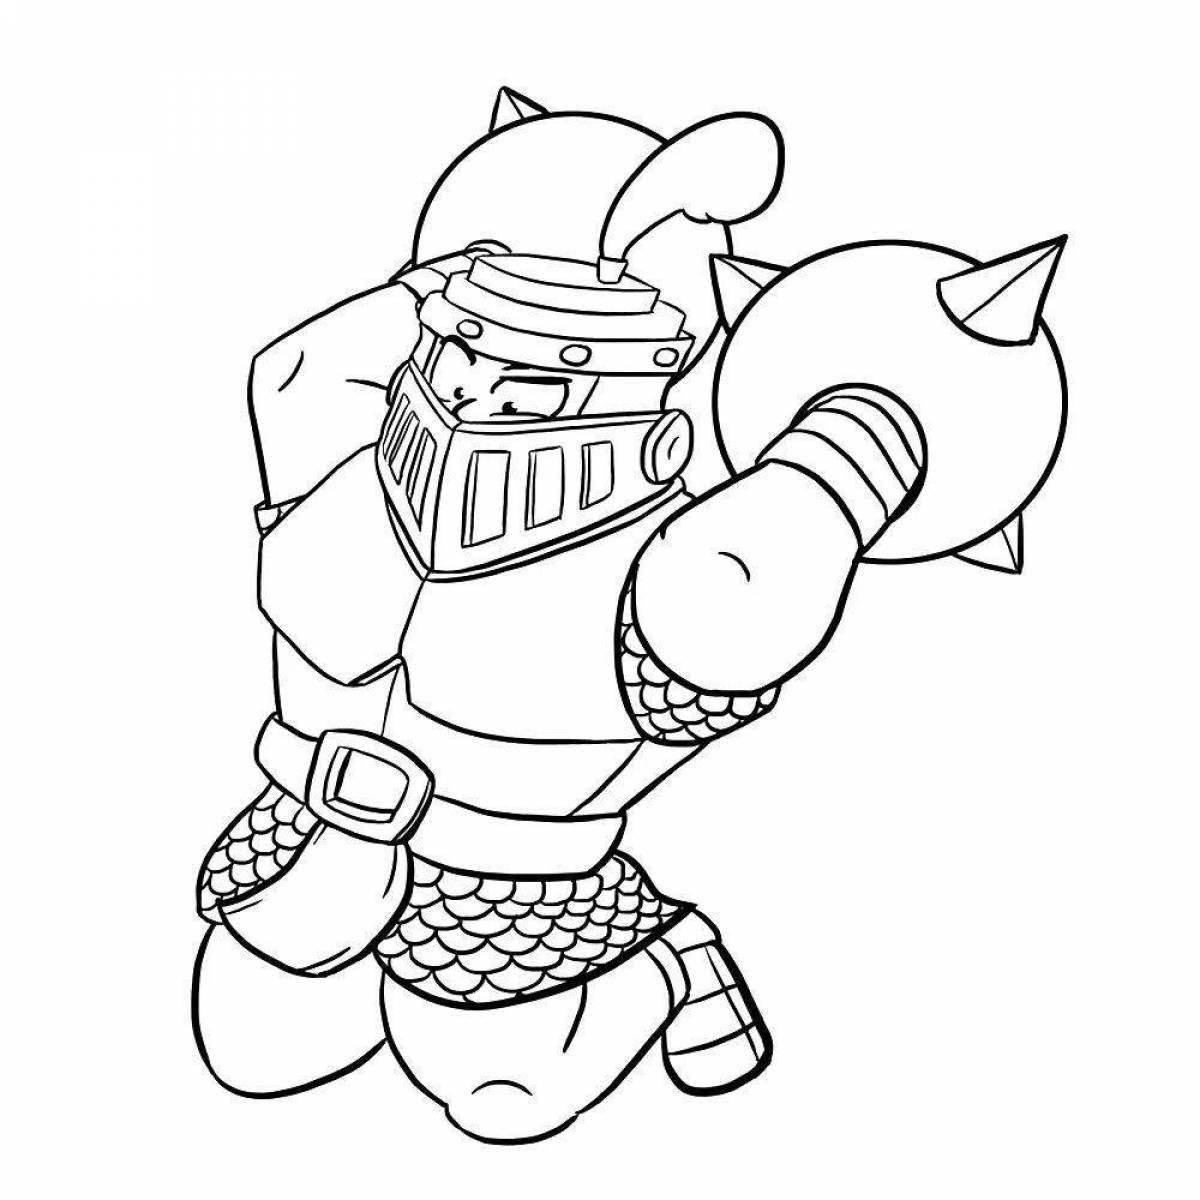 Glitter clash royale coloring page